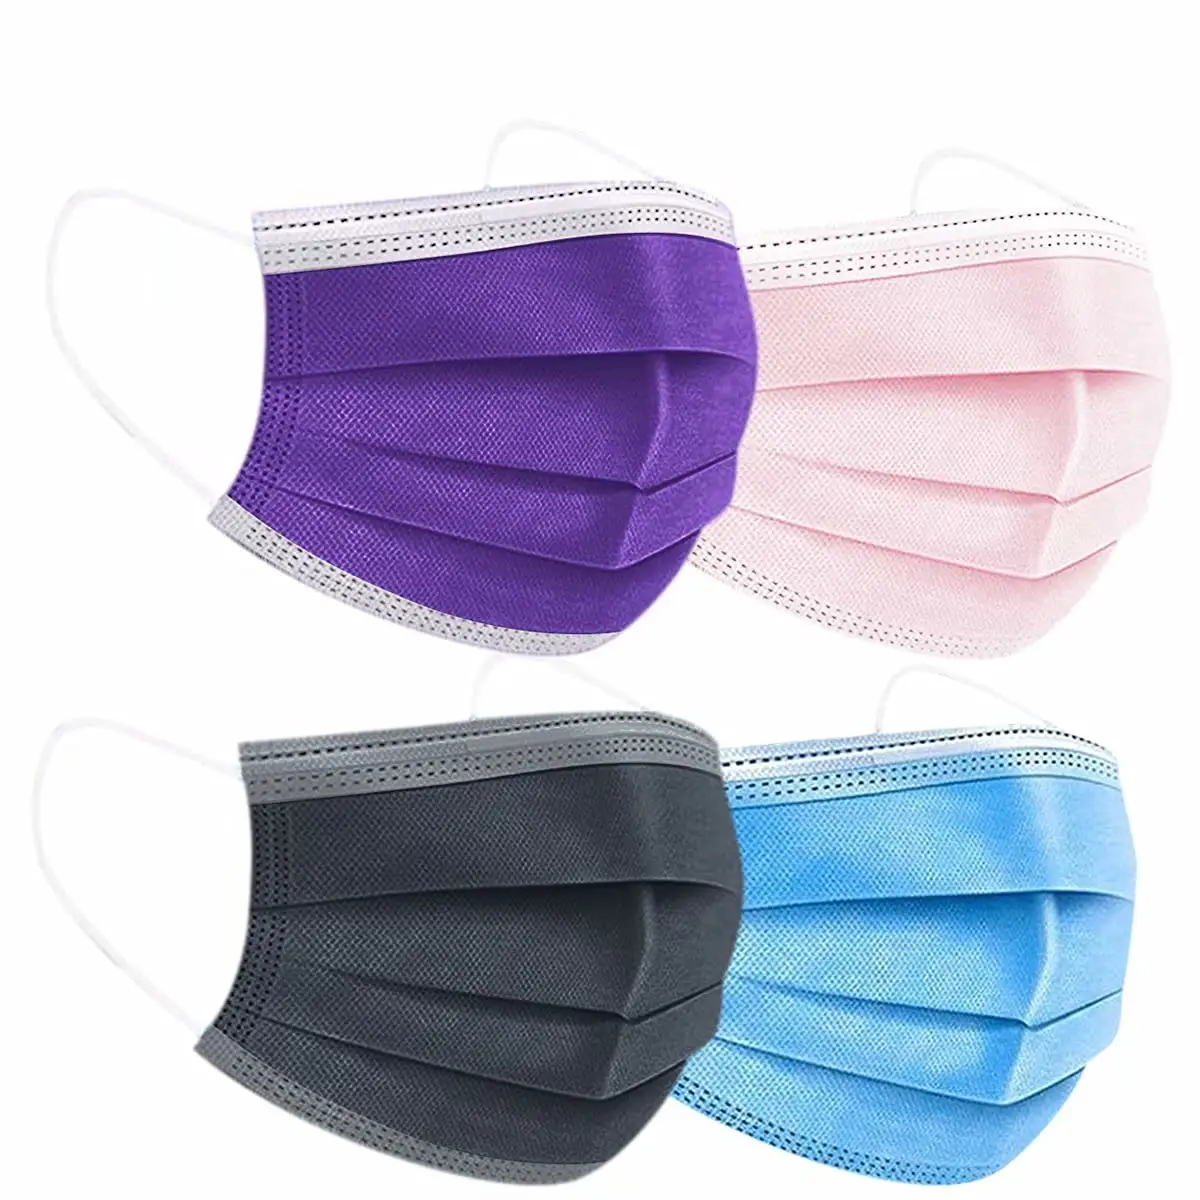 50pcs/Box Breathable Nose Mouth Cover 3 Filter Layer Earloop Disposable Face Mask Nonwoven Face Mask type iir surgical facemask